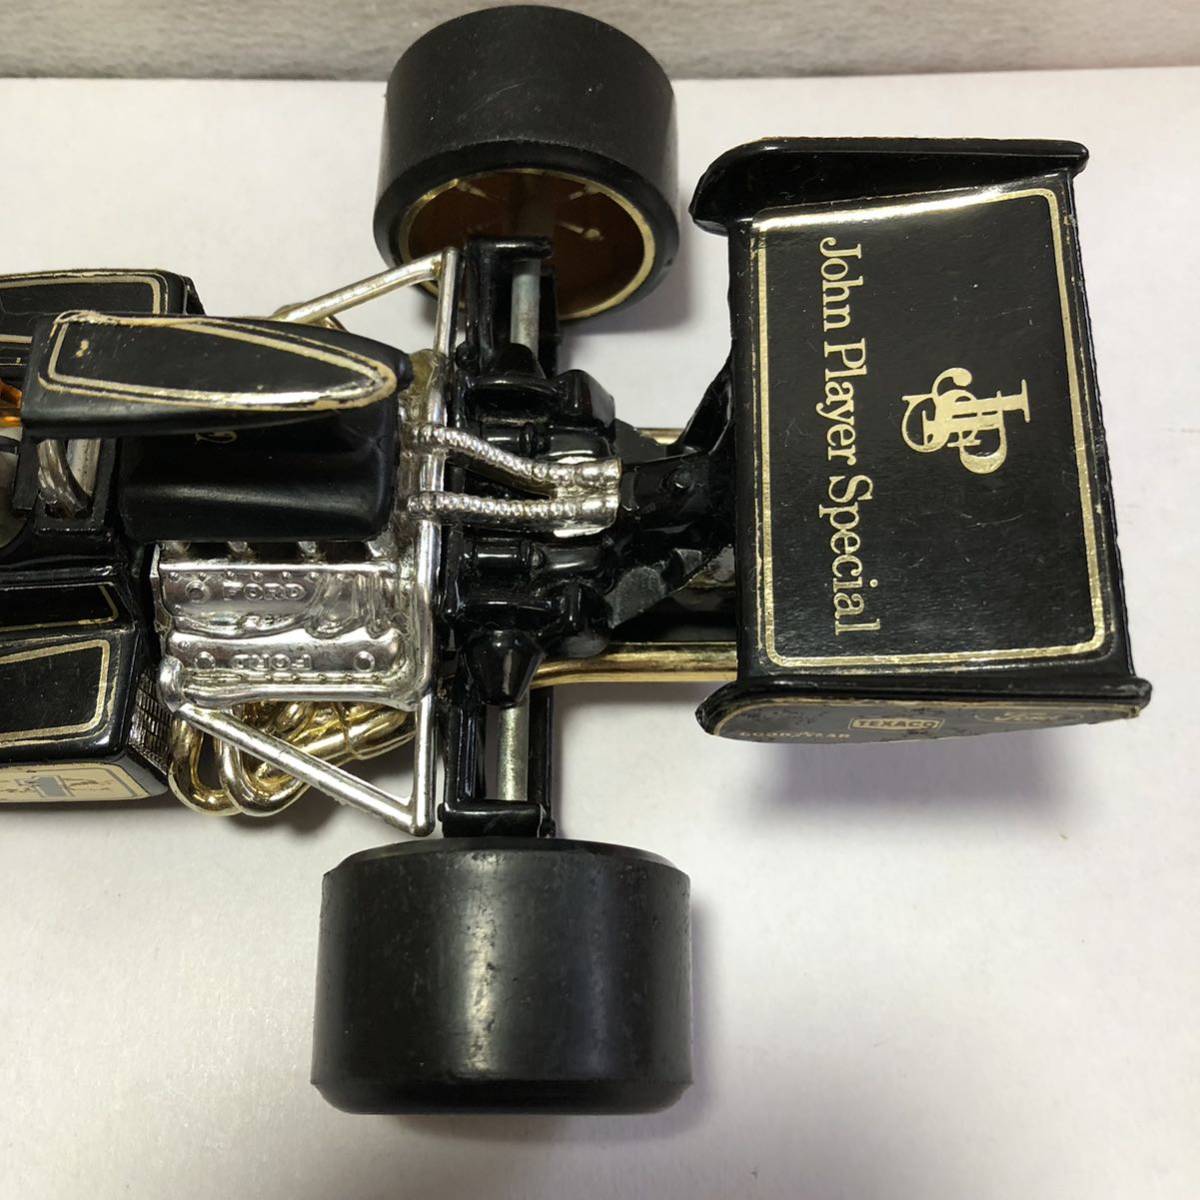  super ultra rare out of print rare!CORGI| Corgi!JOHN PLAYER SPECIAL F1.1/18 scale! die-cast minicar! that time thing! hard-to-find model!